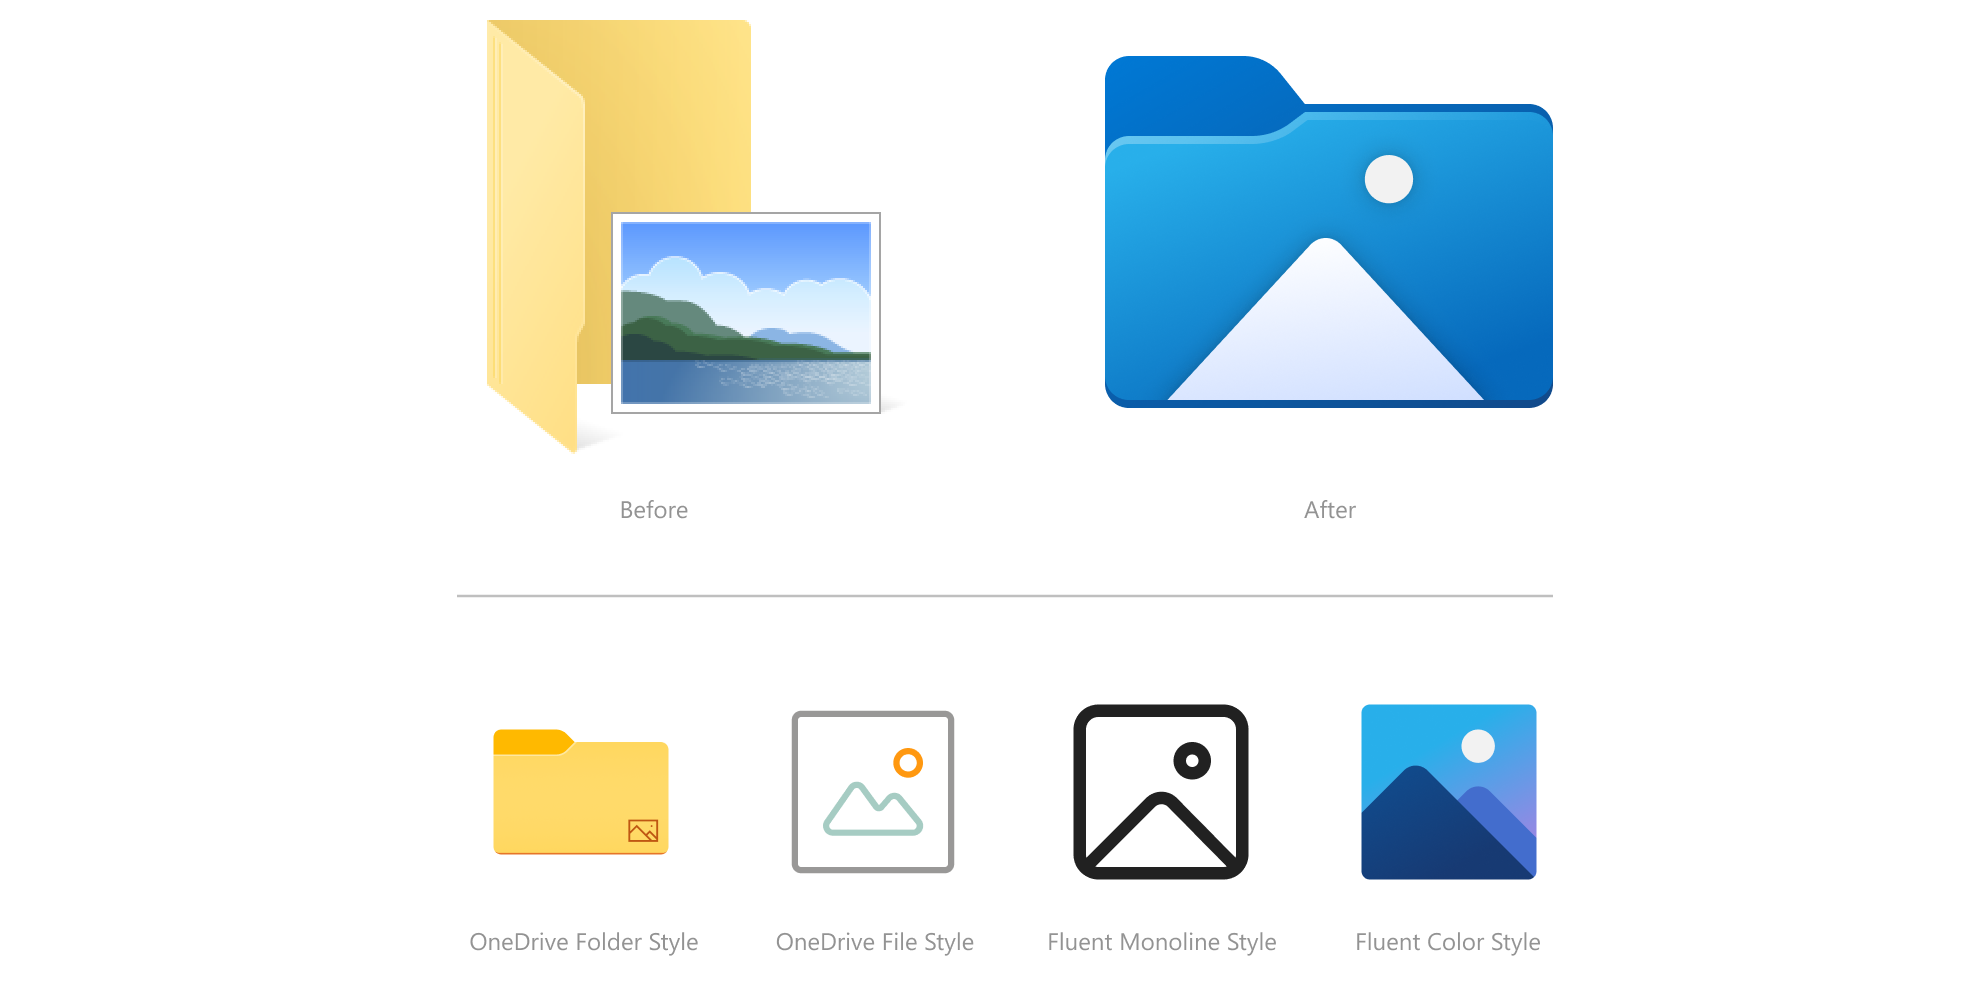 New File Explorer icons in Windows 10